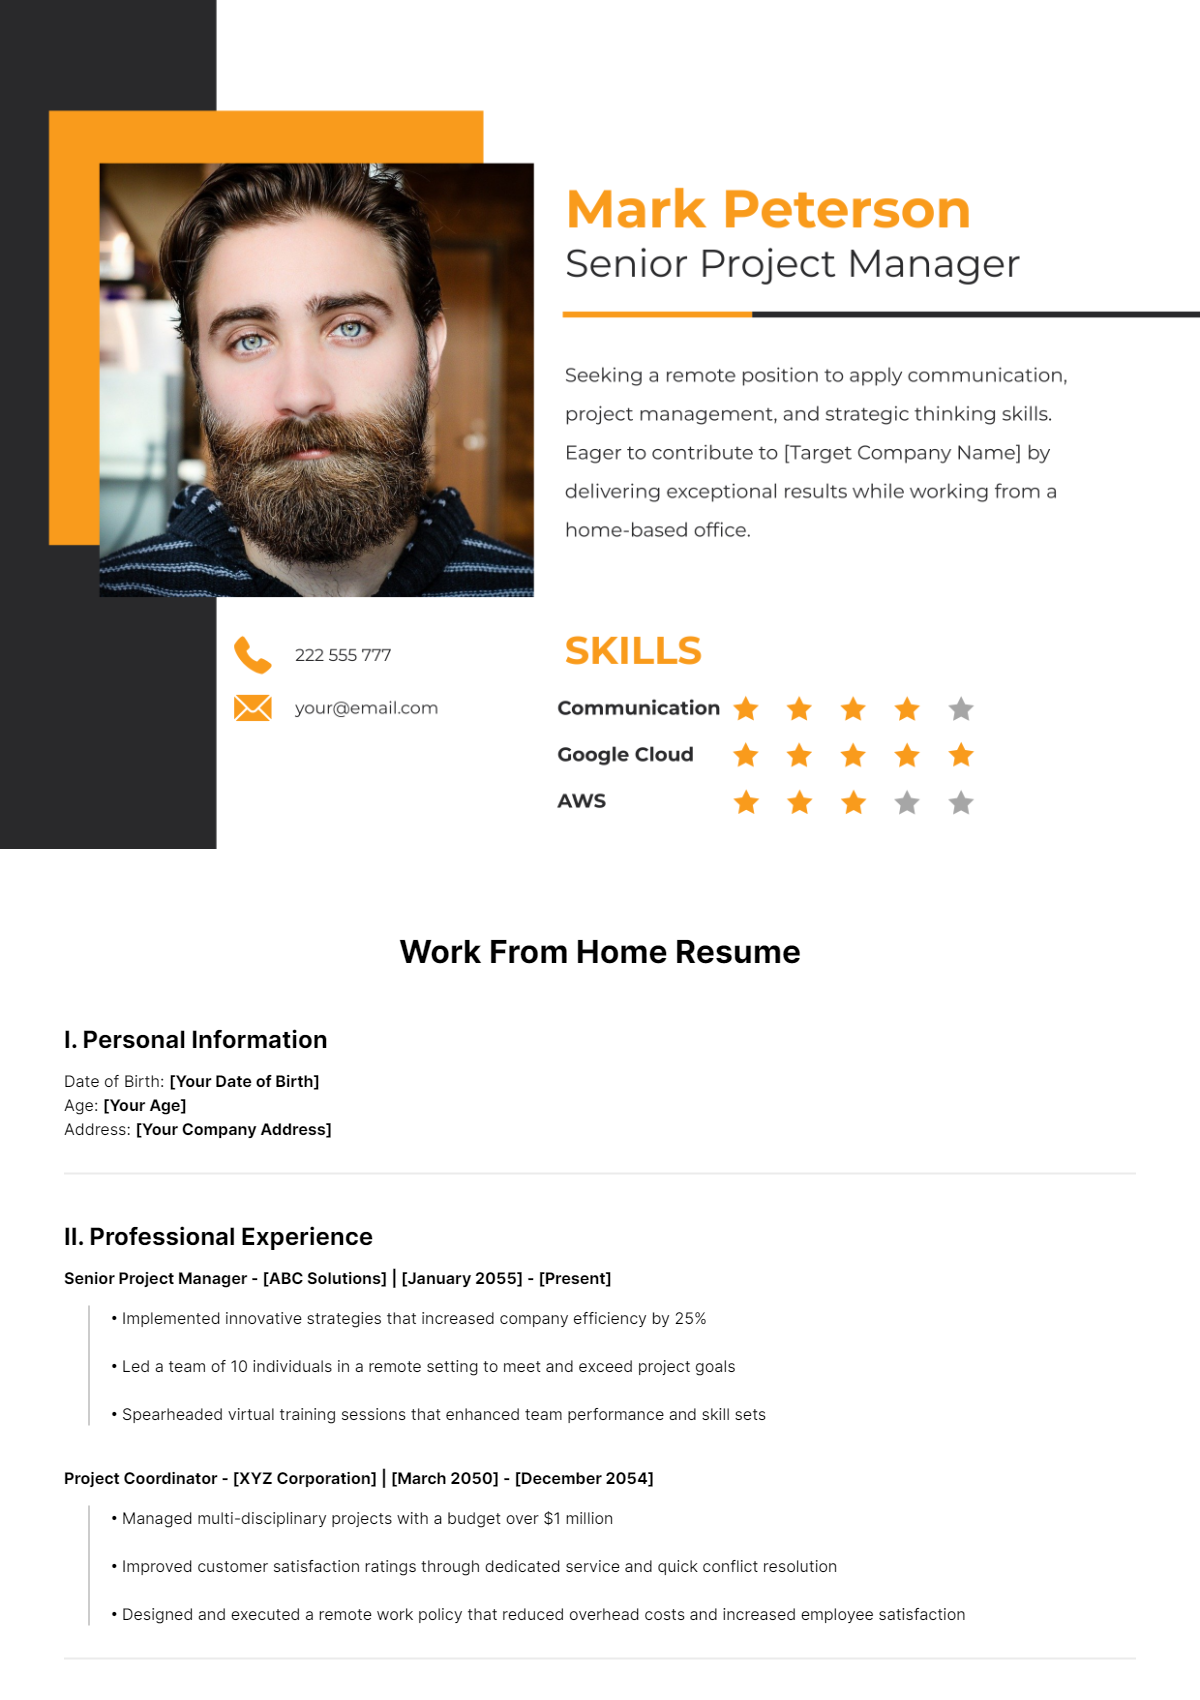 Work From Home Resume Template